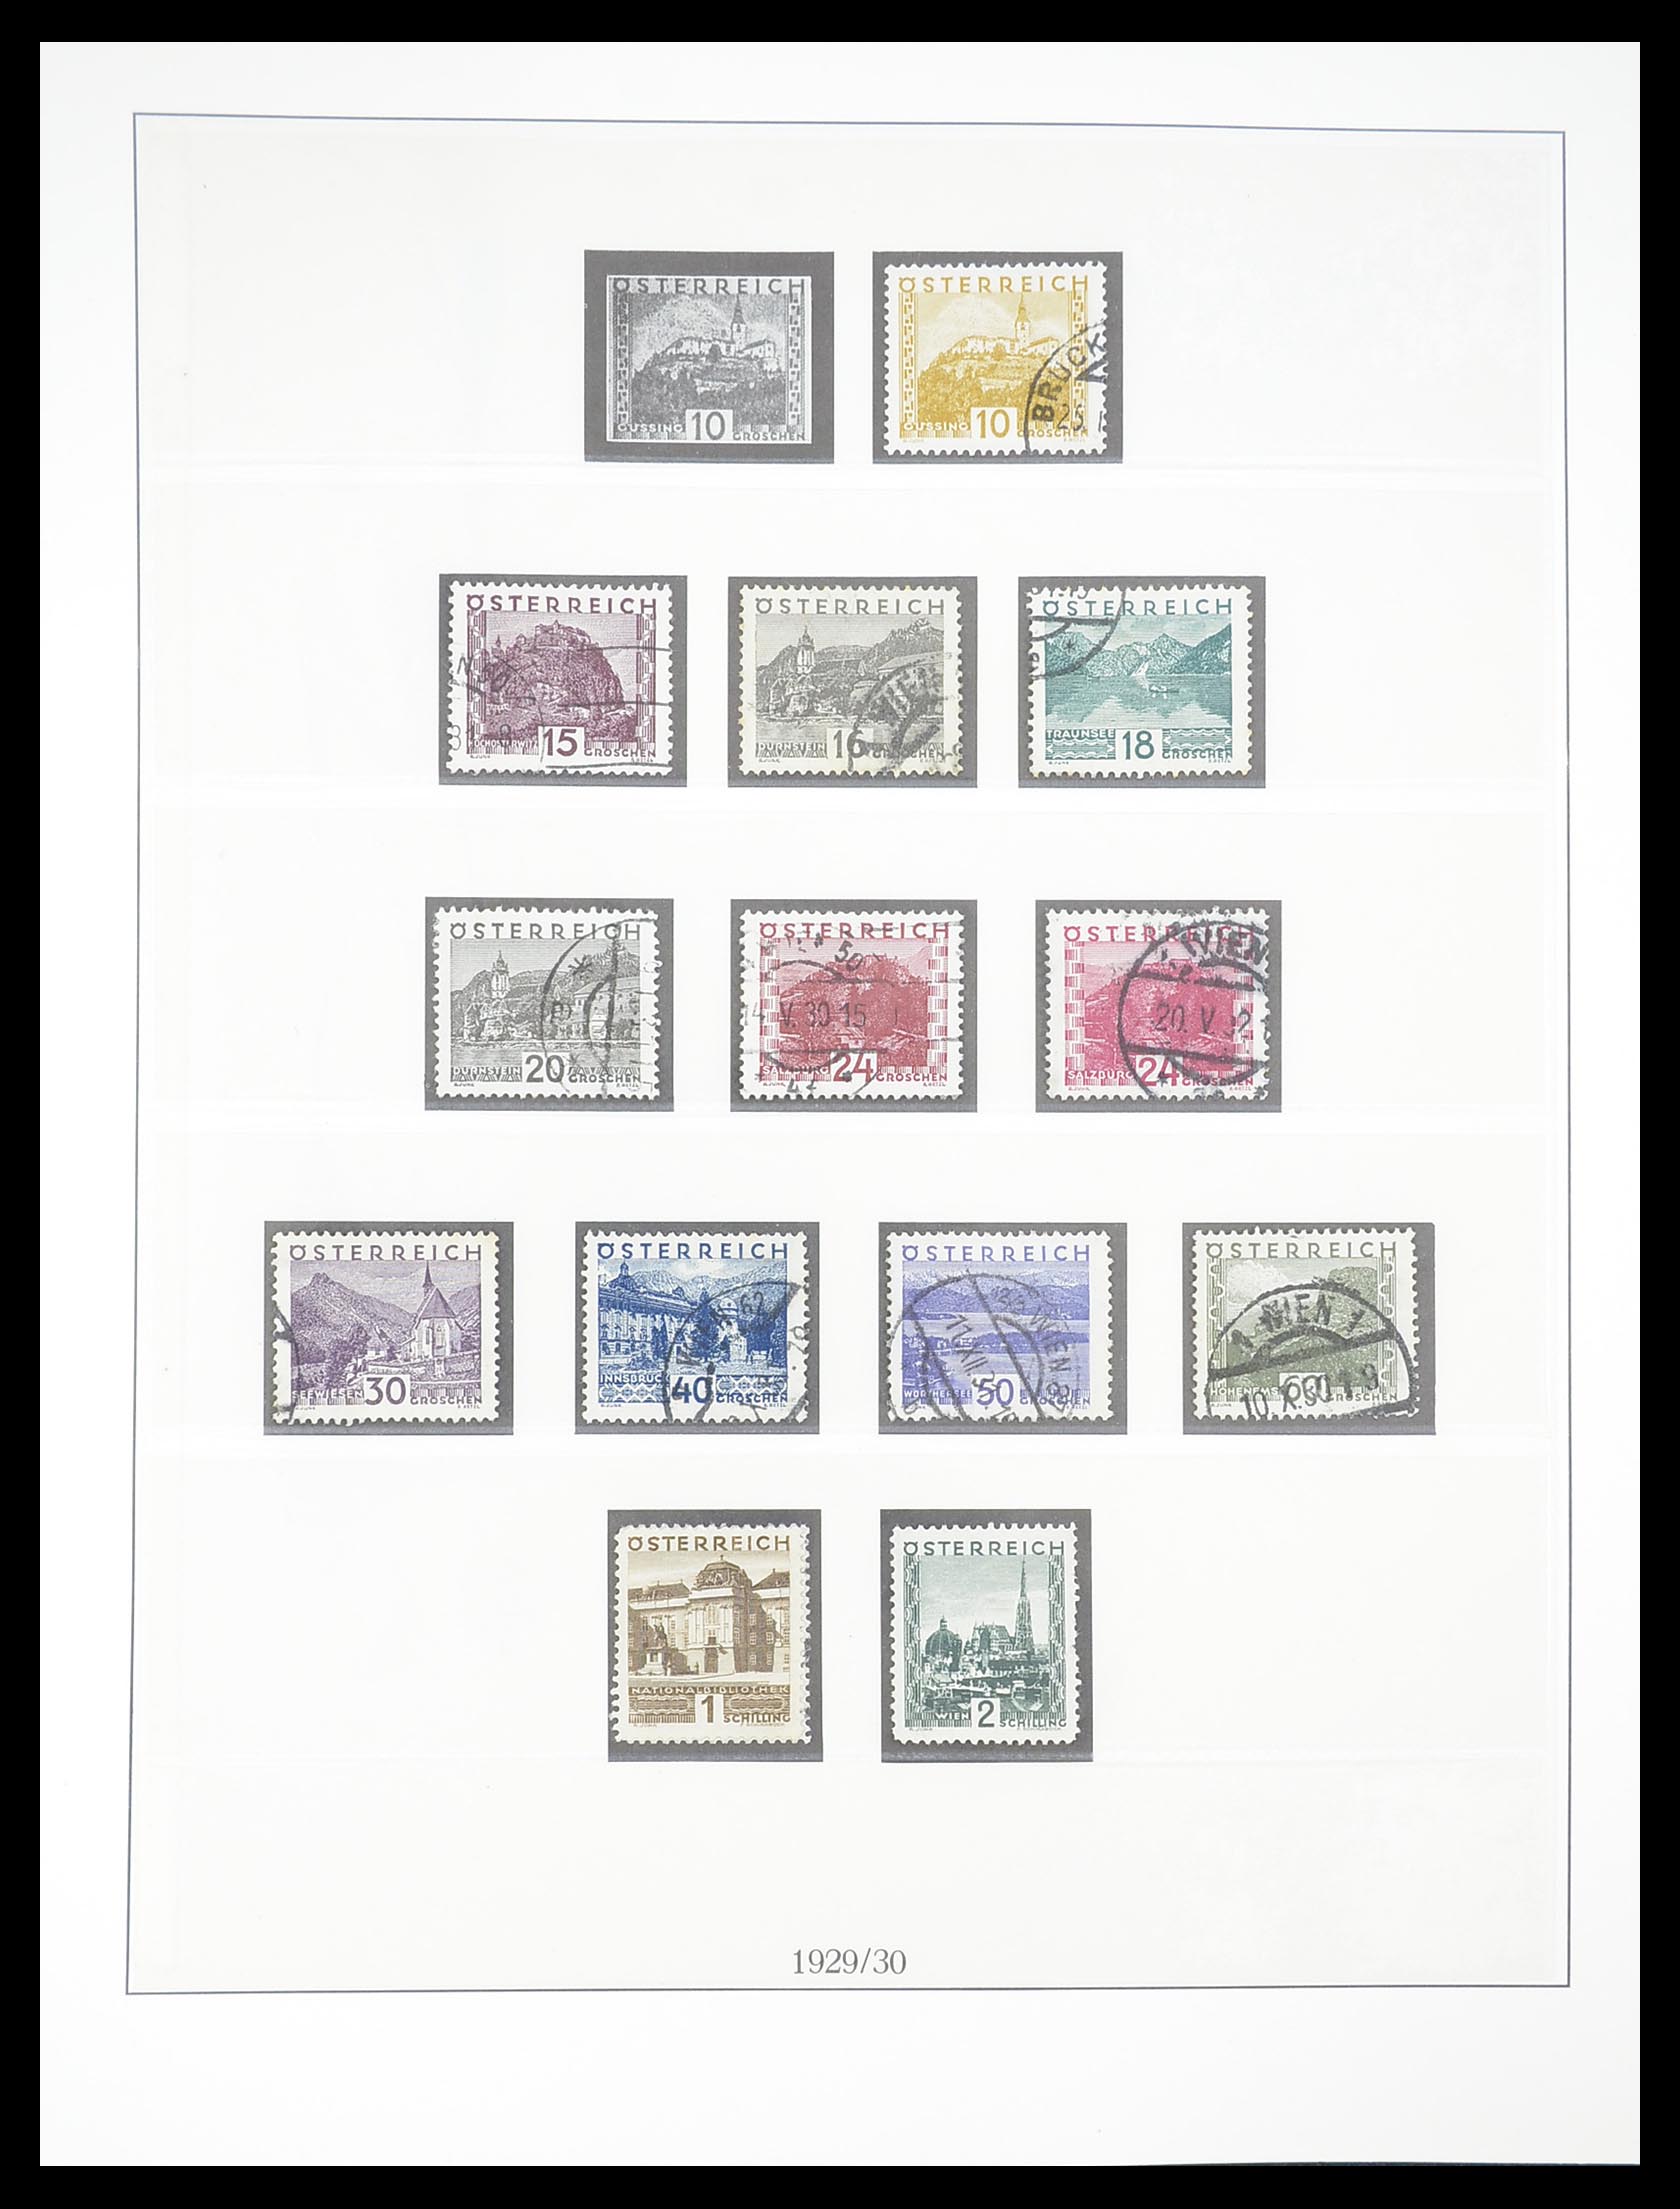 33189 077 - Stamp collection 33189 European countries 1850-1950.